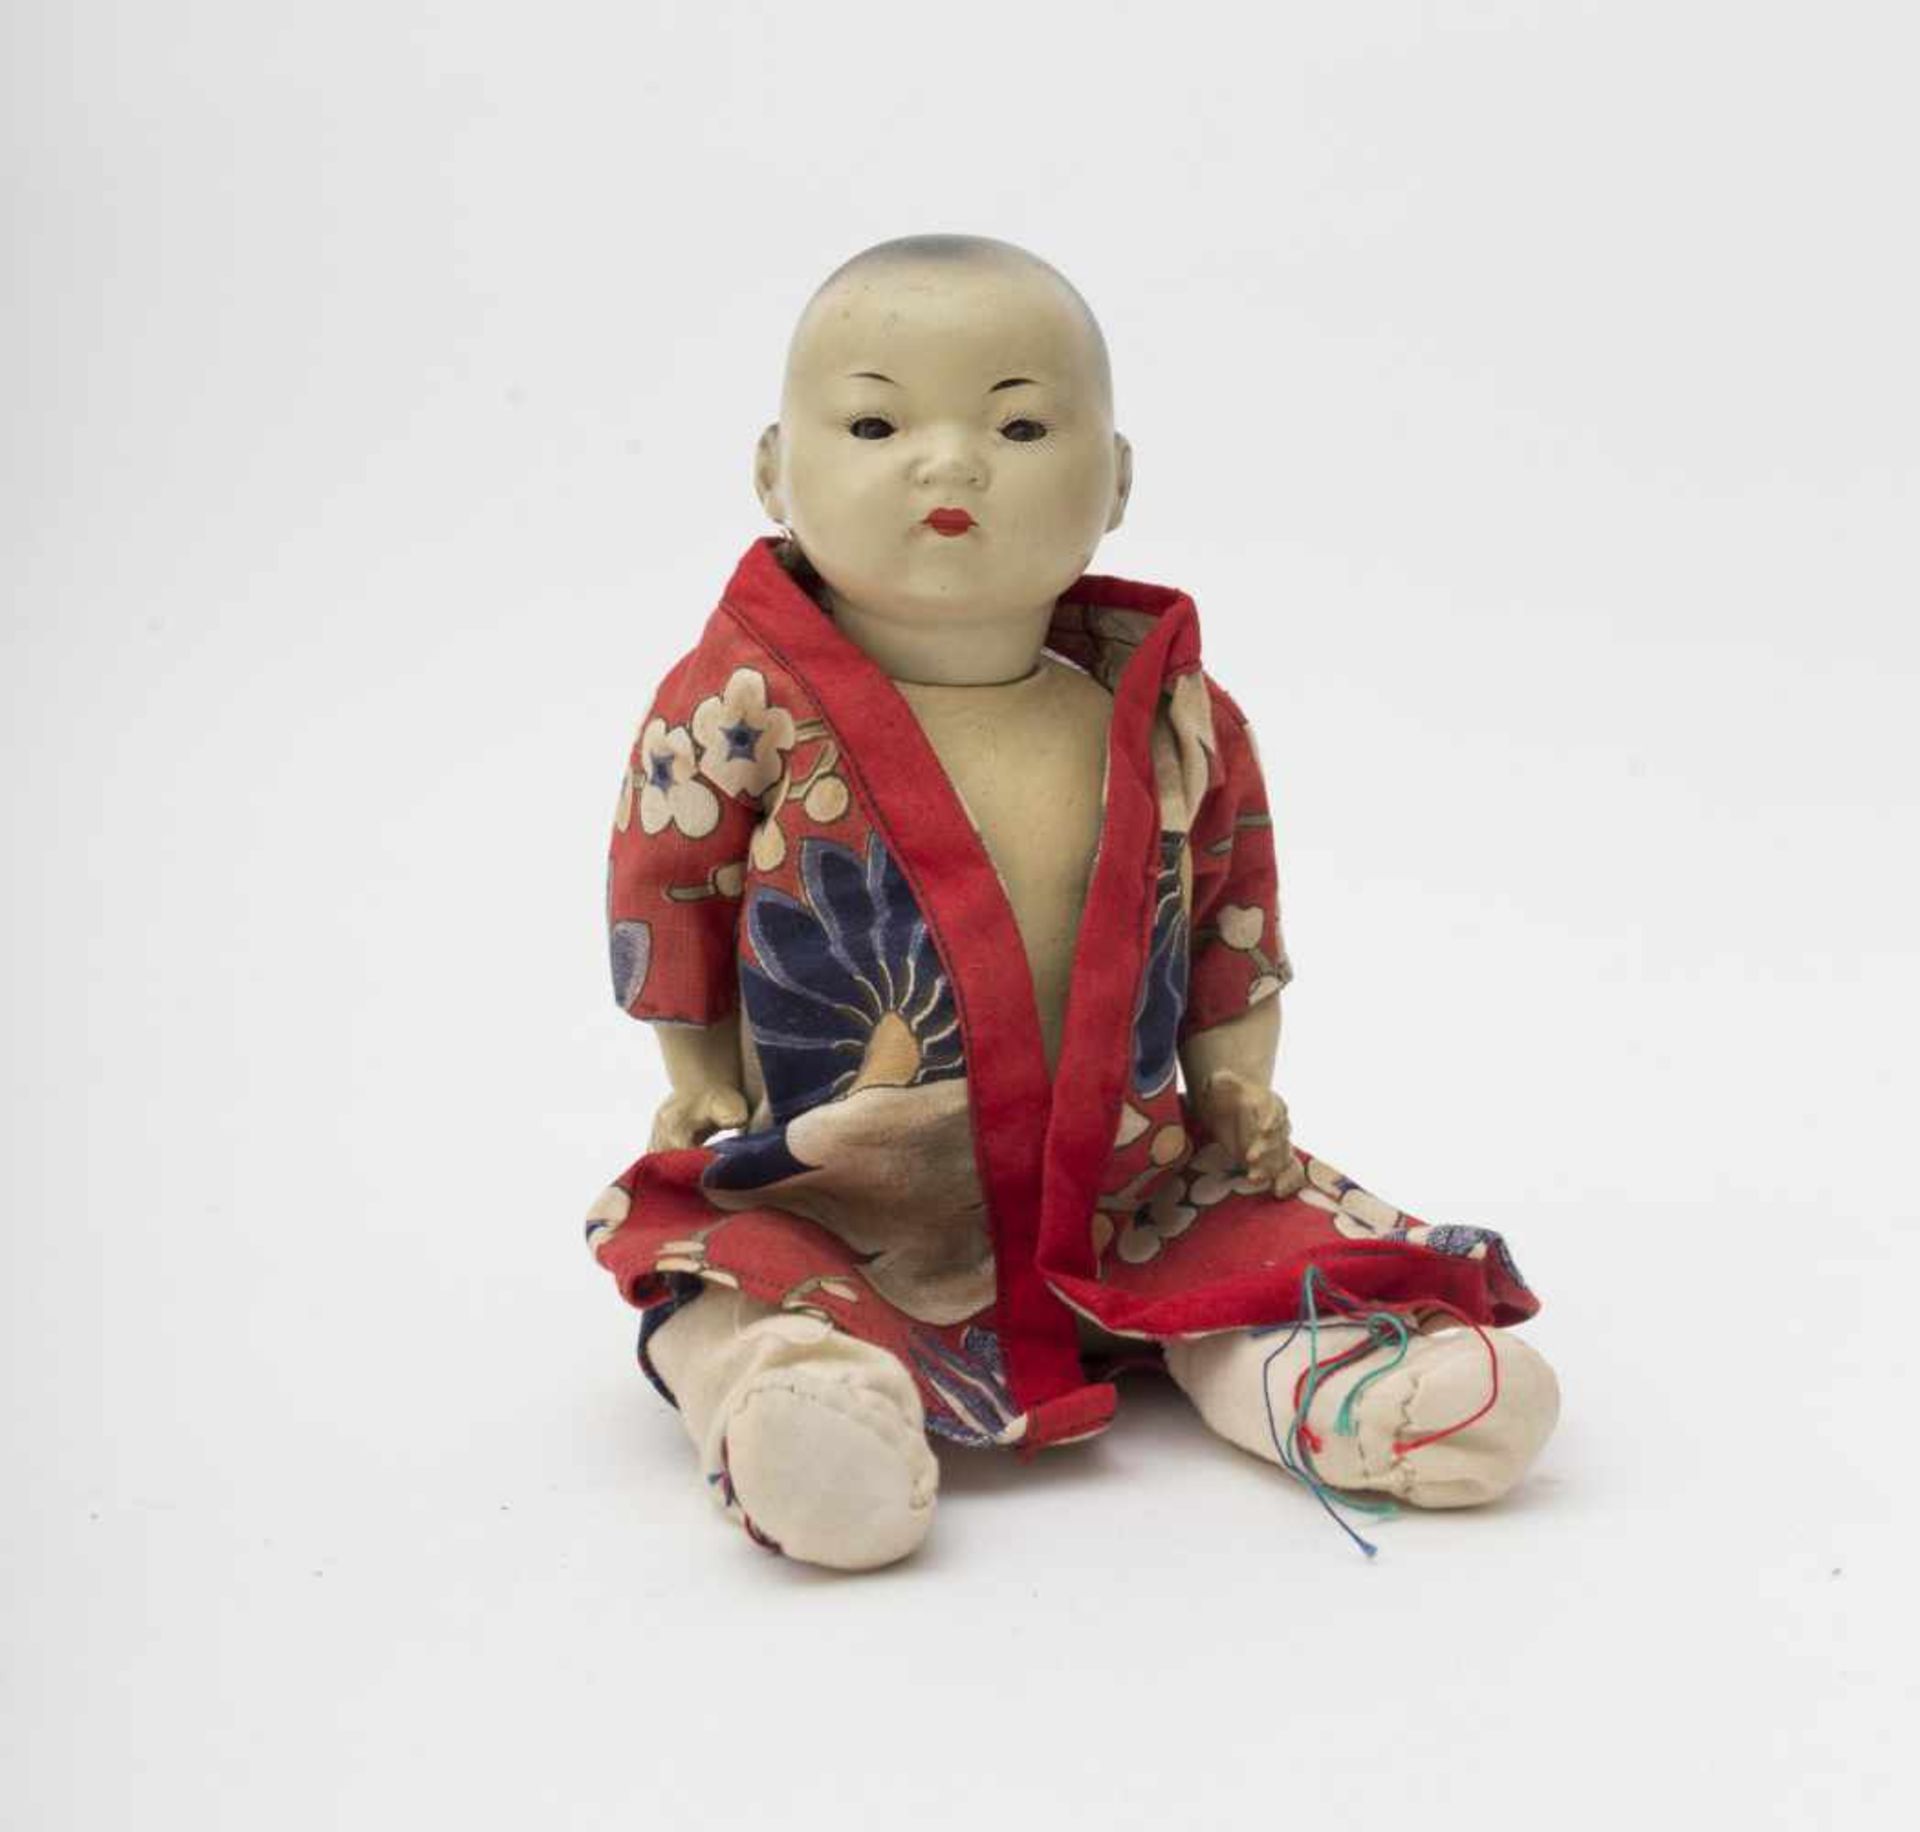 Asian character baby doll Biscuit head, branded “AM 353 12/0”, blue sleeping eyes, original body